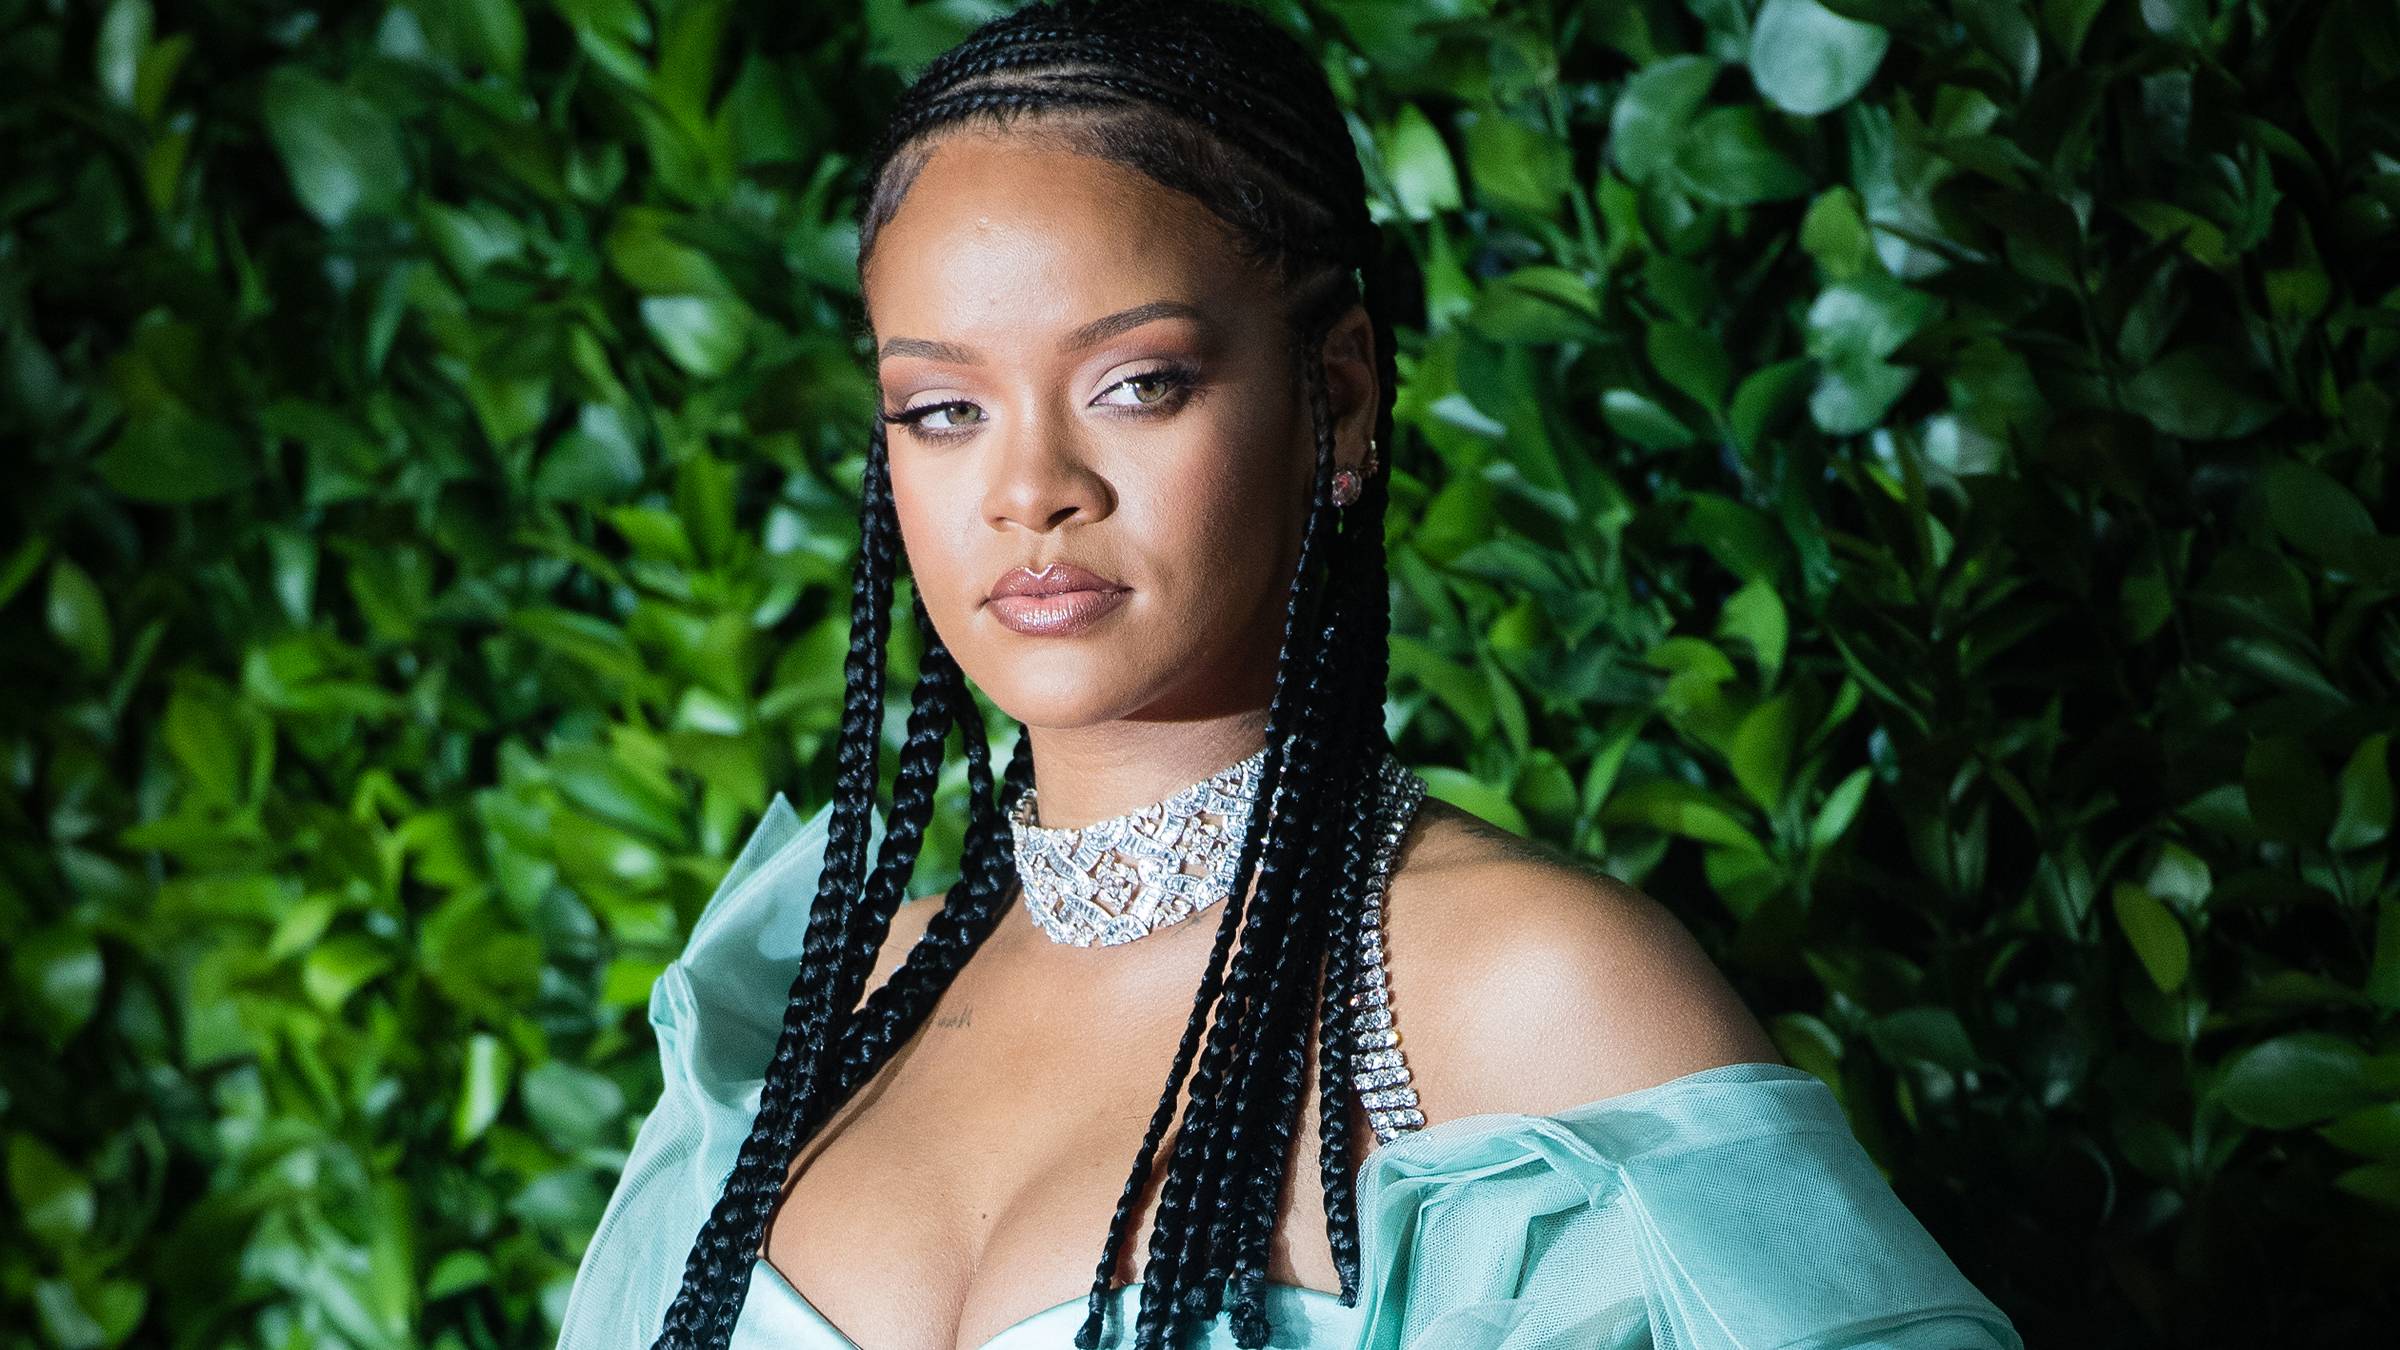 Rihanna out as CEO at Savage X Fenty lingerie brand she founded